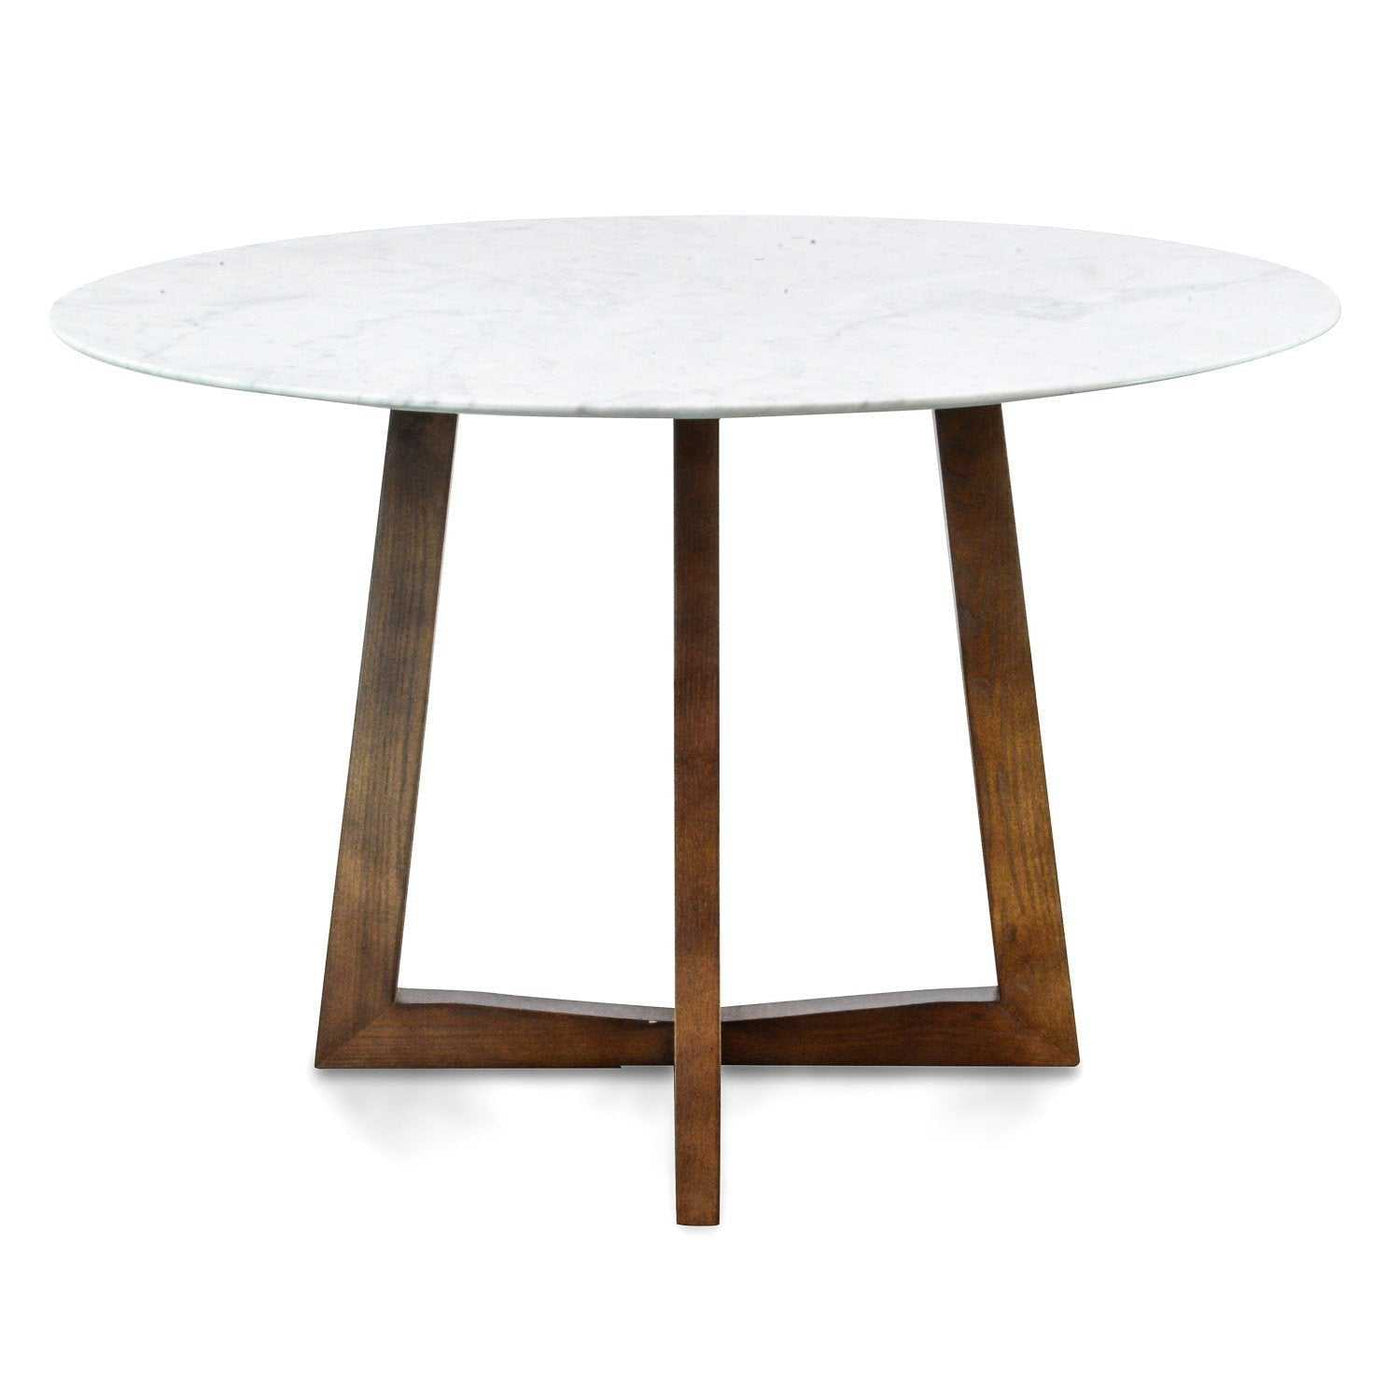 1.15m Round Marble Dining Table - Dark Brown Base